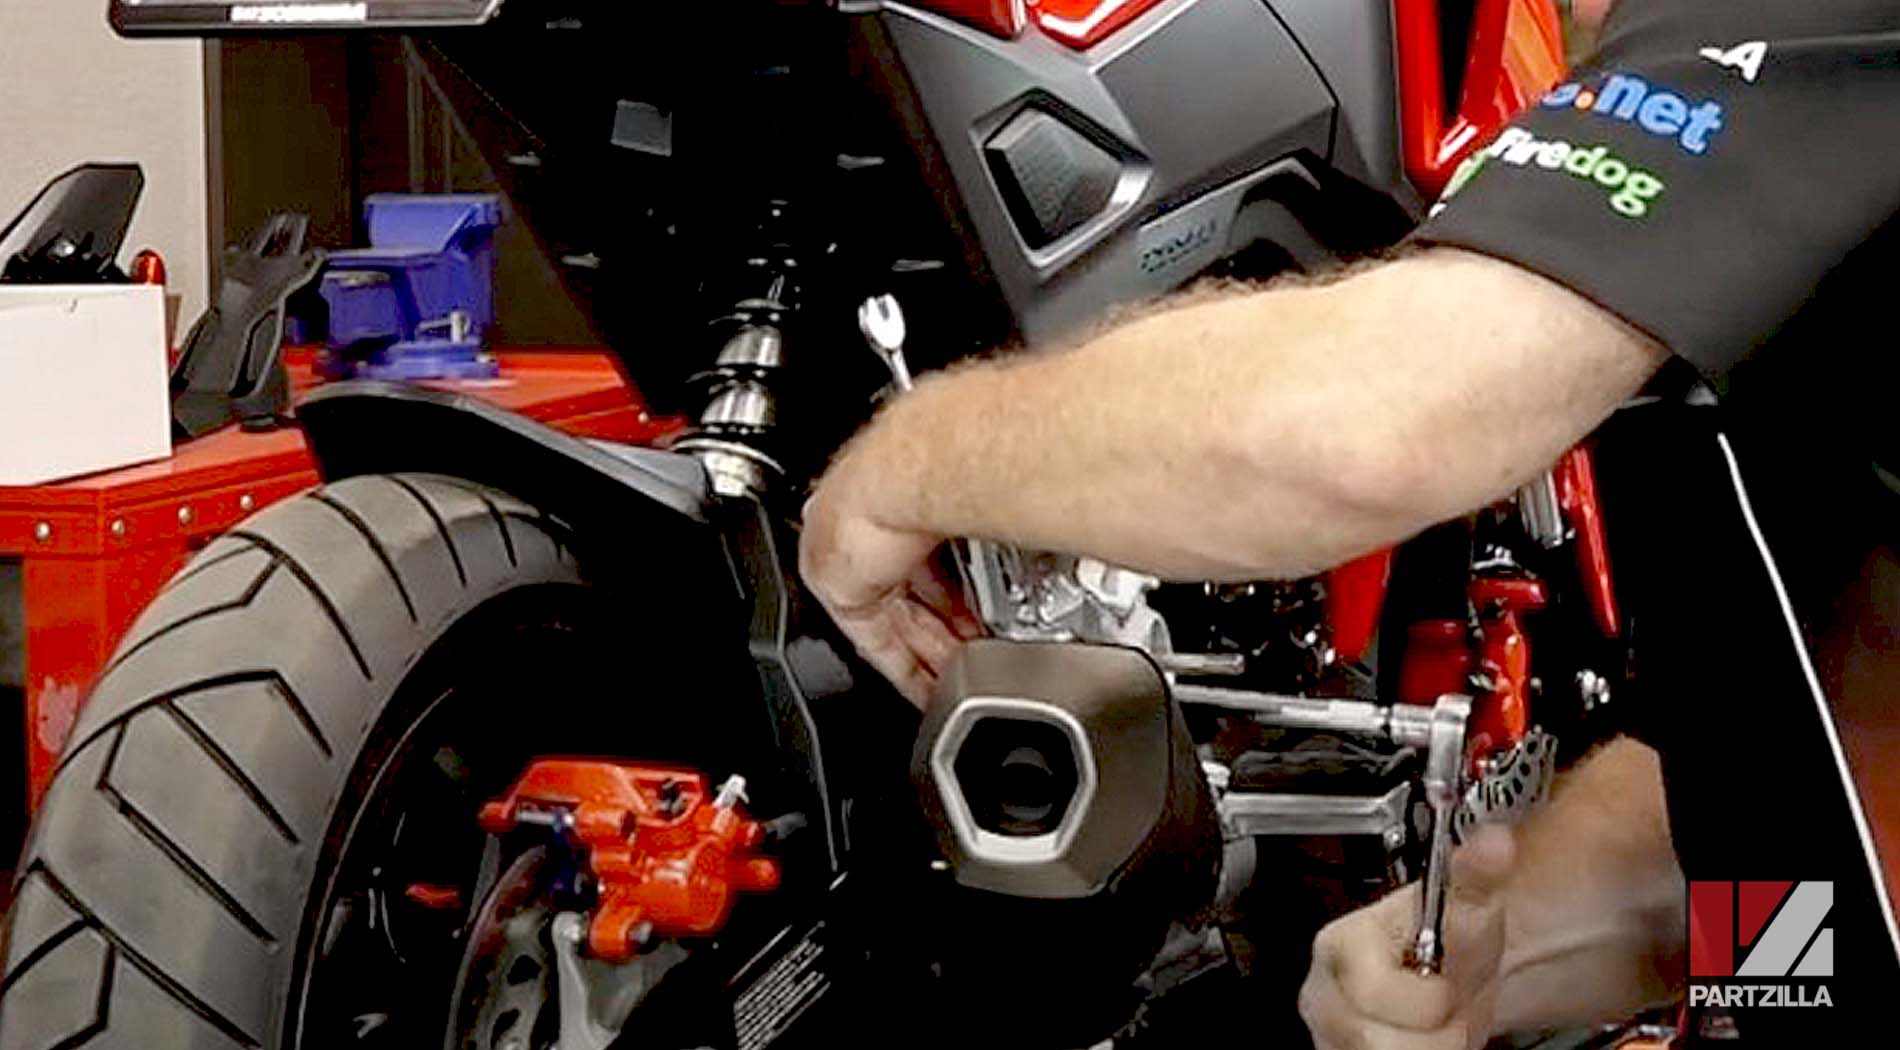 Honda Grom 125 aftermarket rearset upgrade gearshift removal